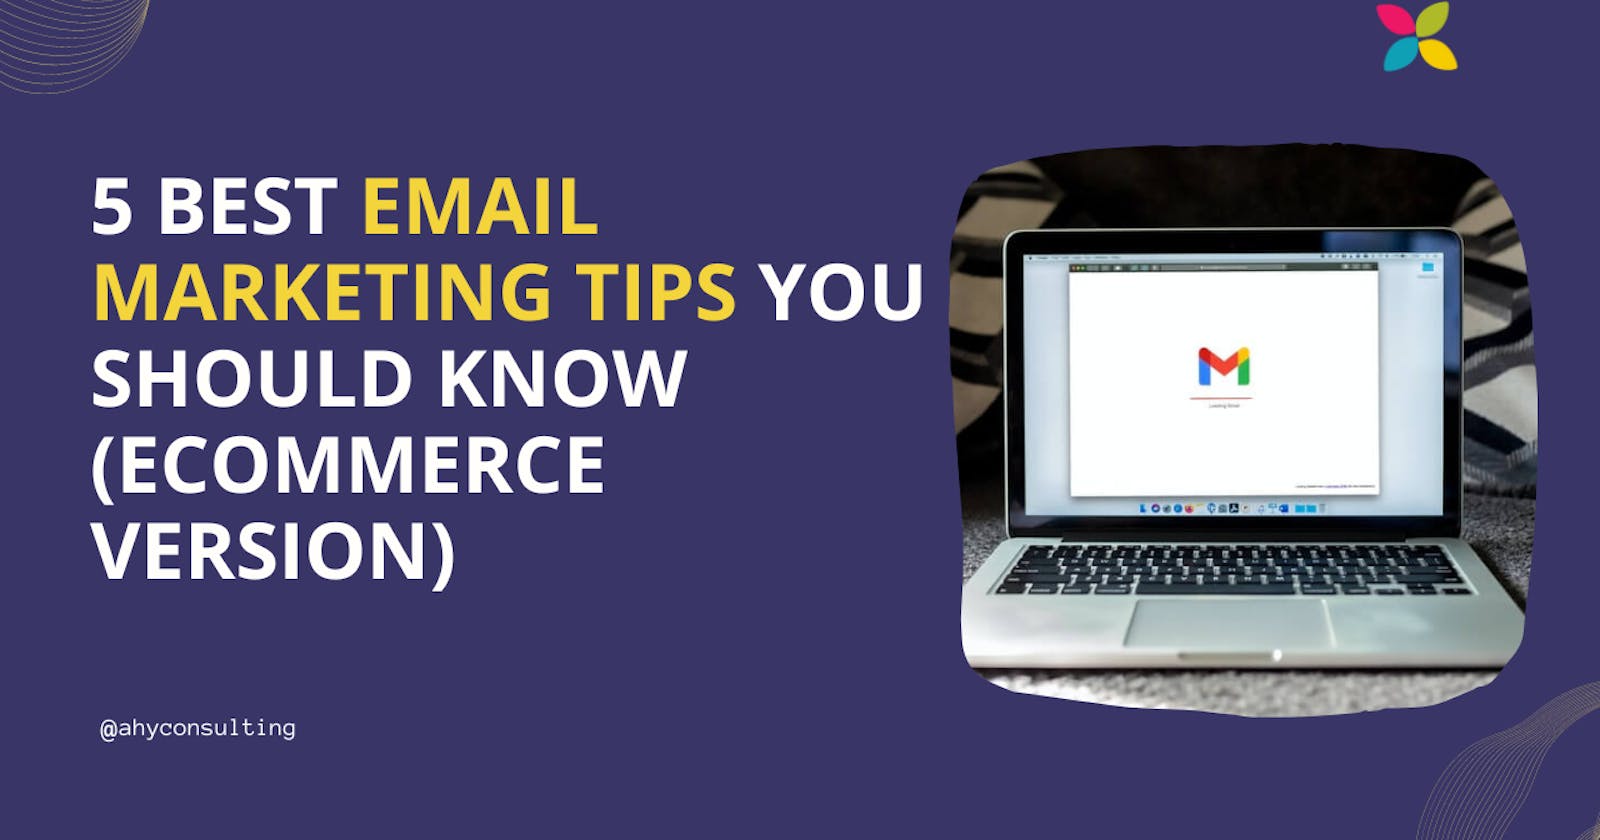 5 best email marketing tips you should know (eCommerce Version)